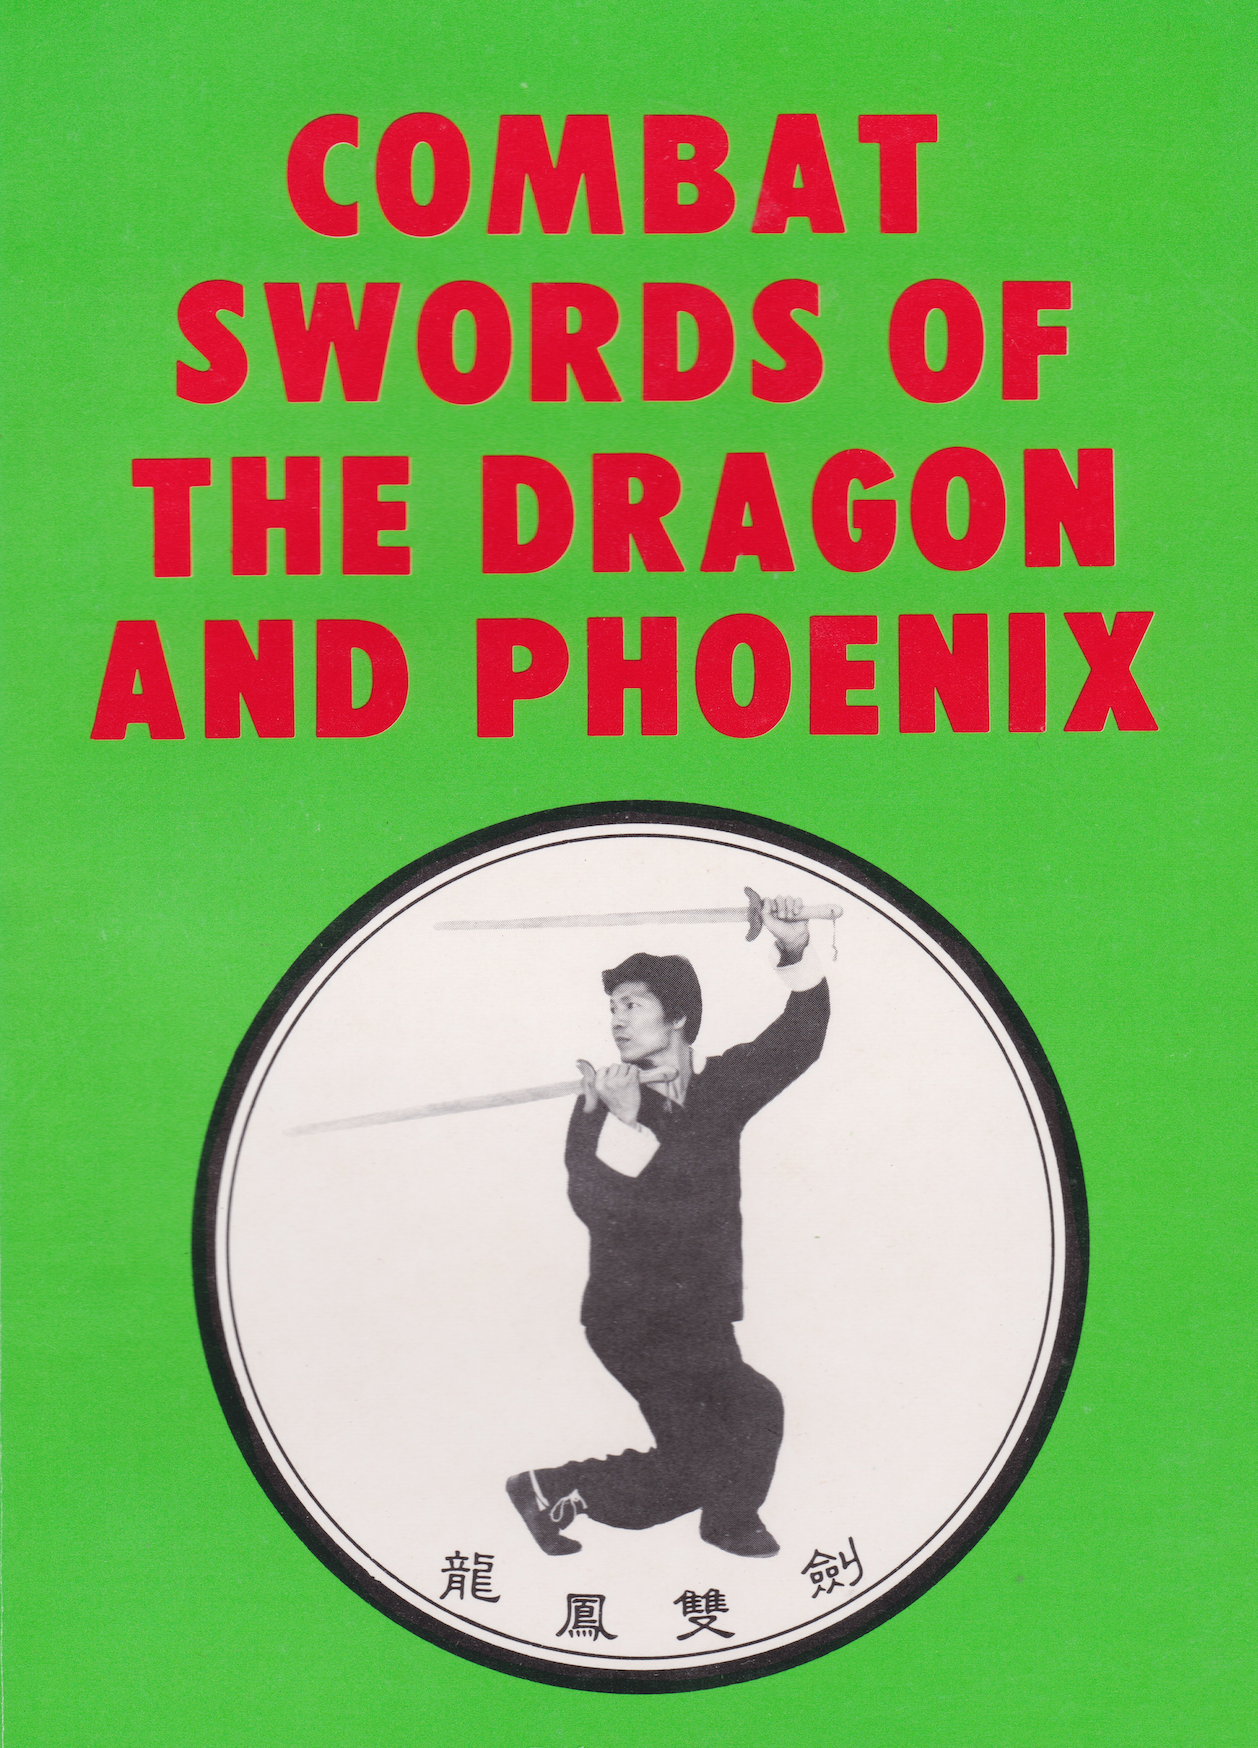 Combat Swords of the Dragon and Phoenix Book by Douglas Hsieh